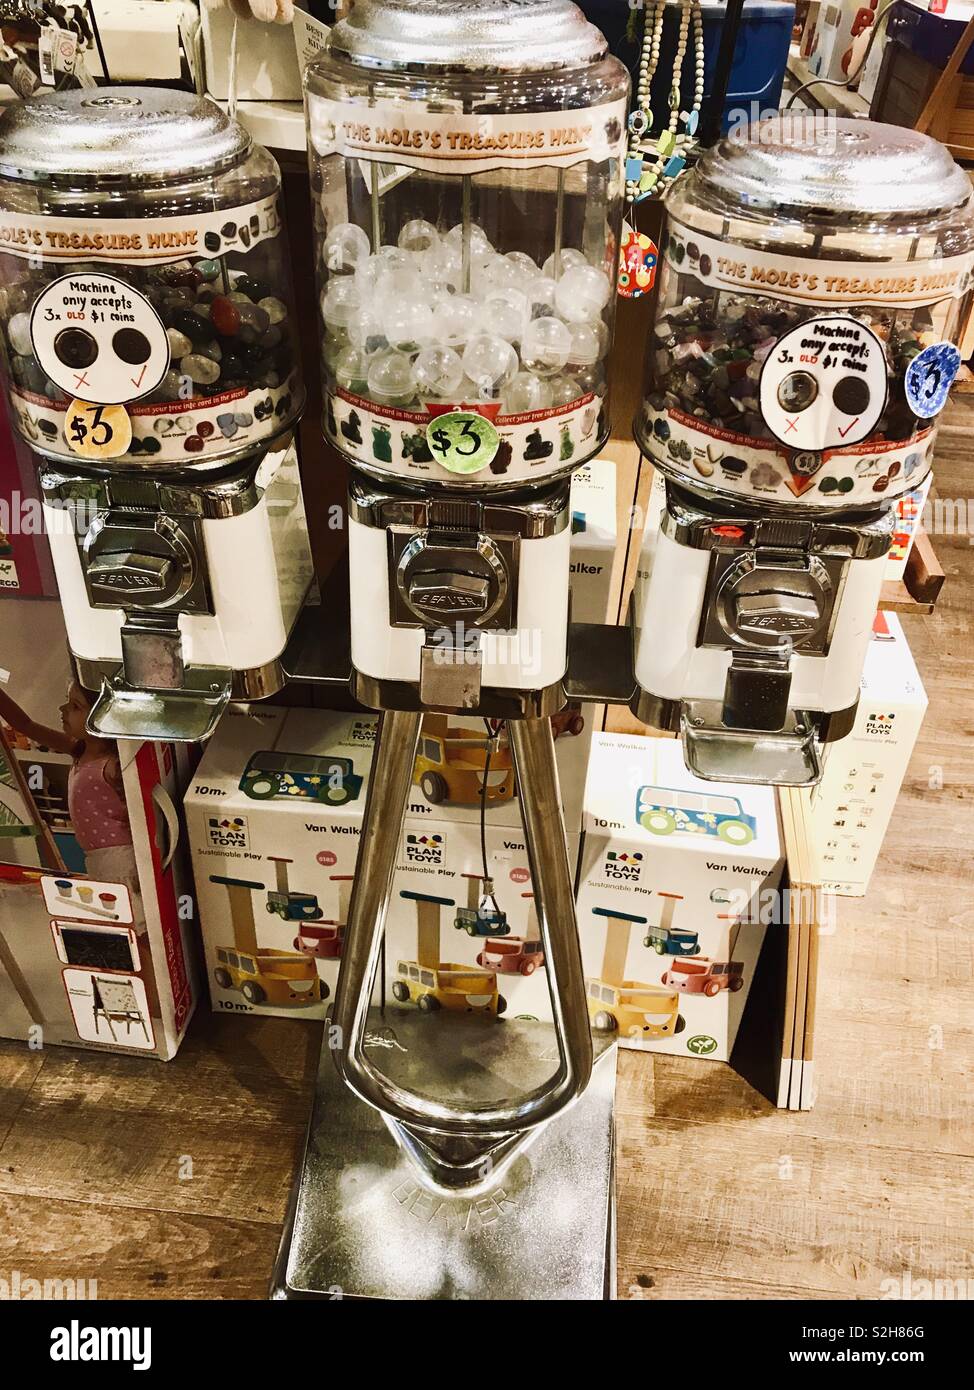 Gumball Vending Machine Dispenser, Children’s sweets in a toy shop Stock Photo